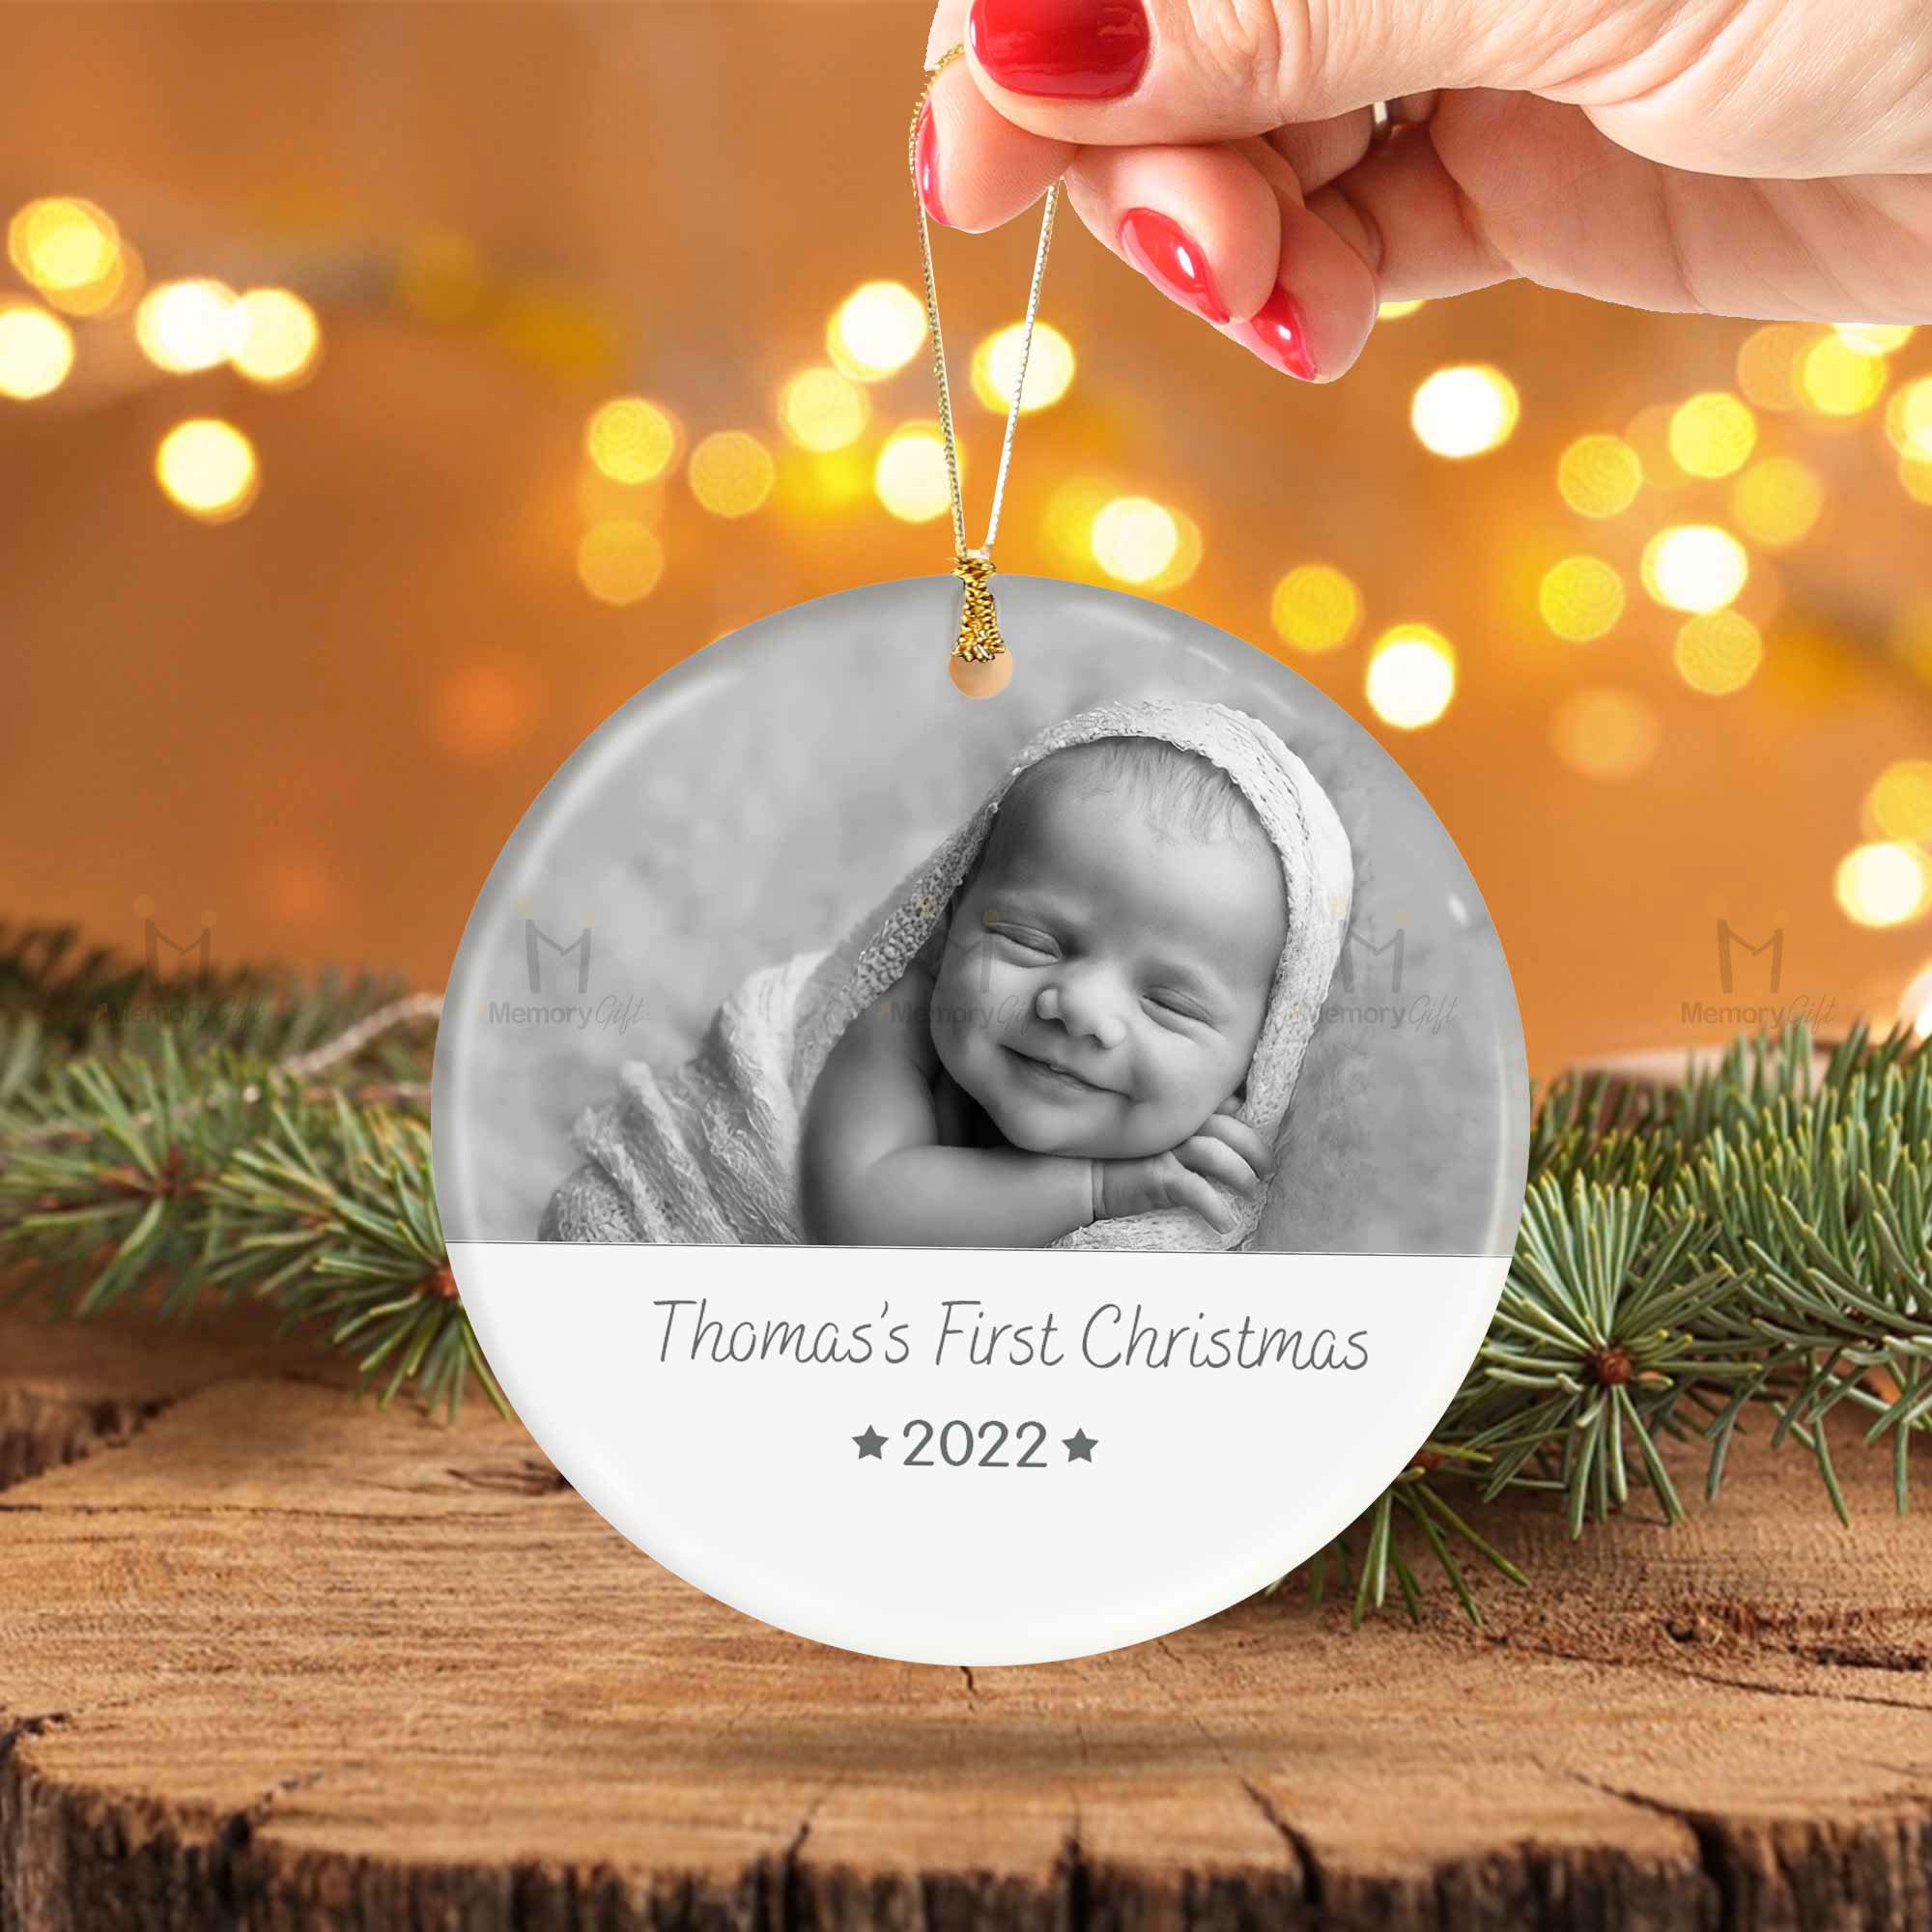 babys first christmas ornament